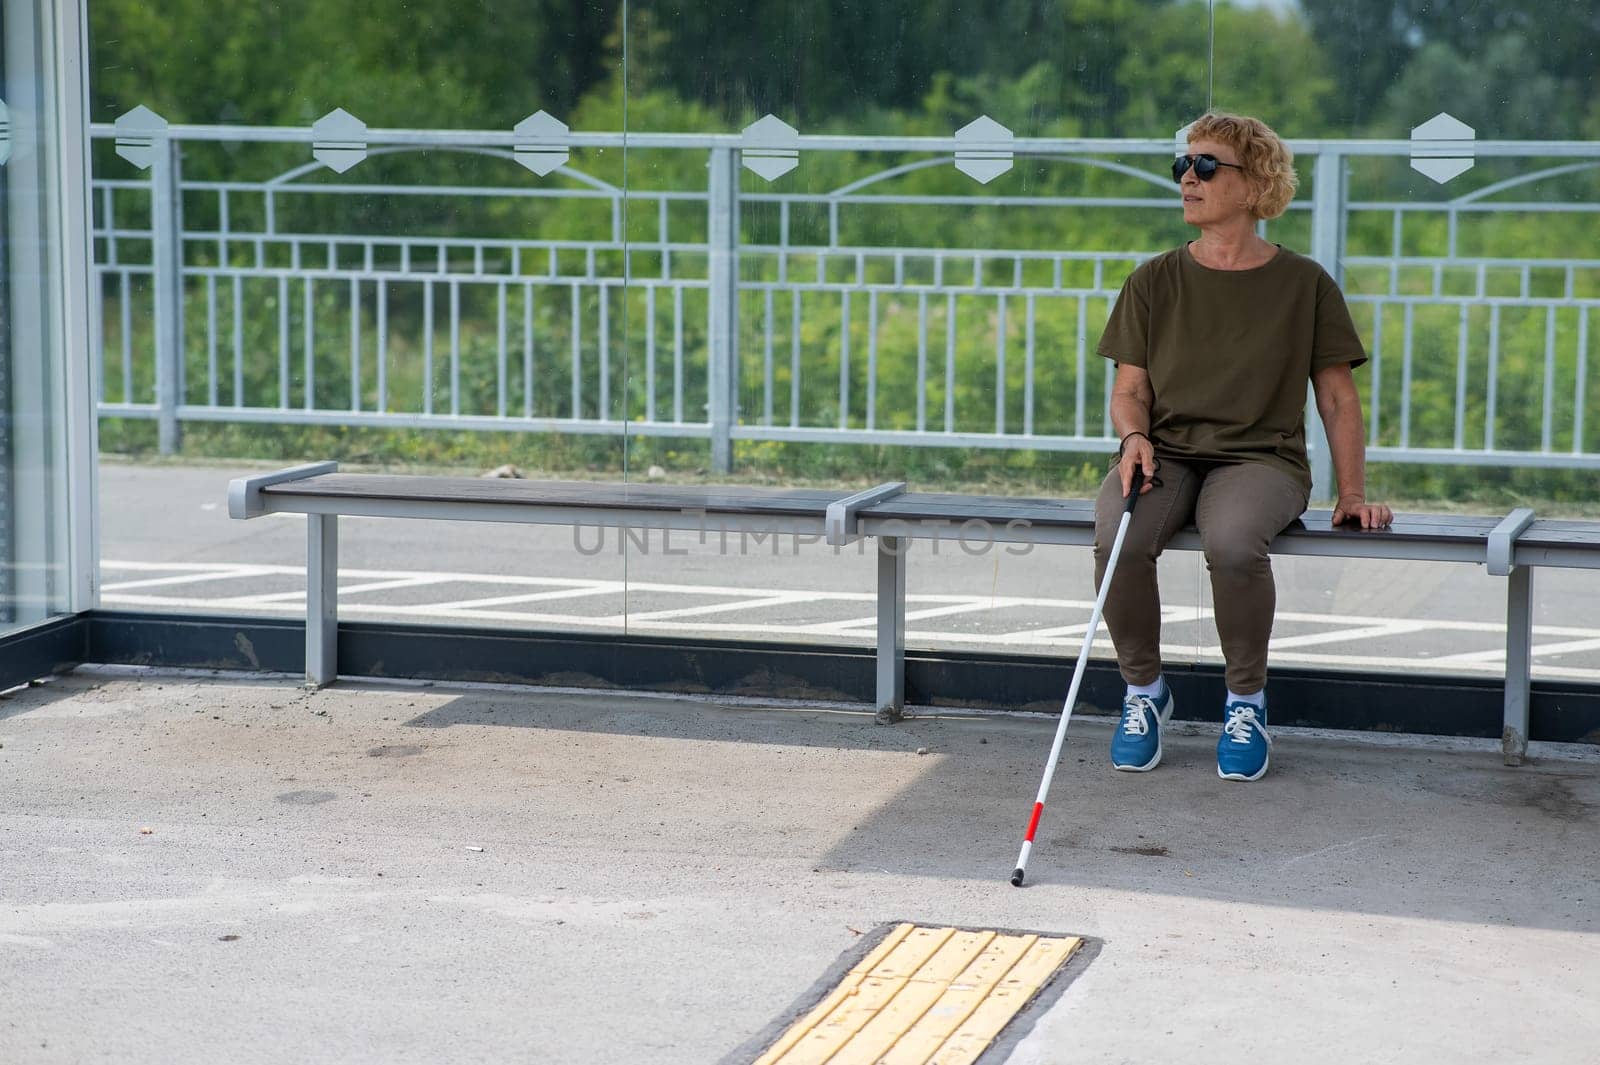 An elderly blind woman is waiting for transport at a bus stop